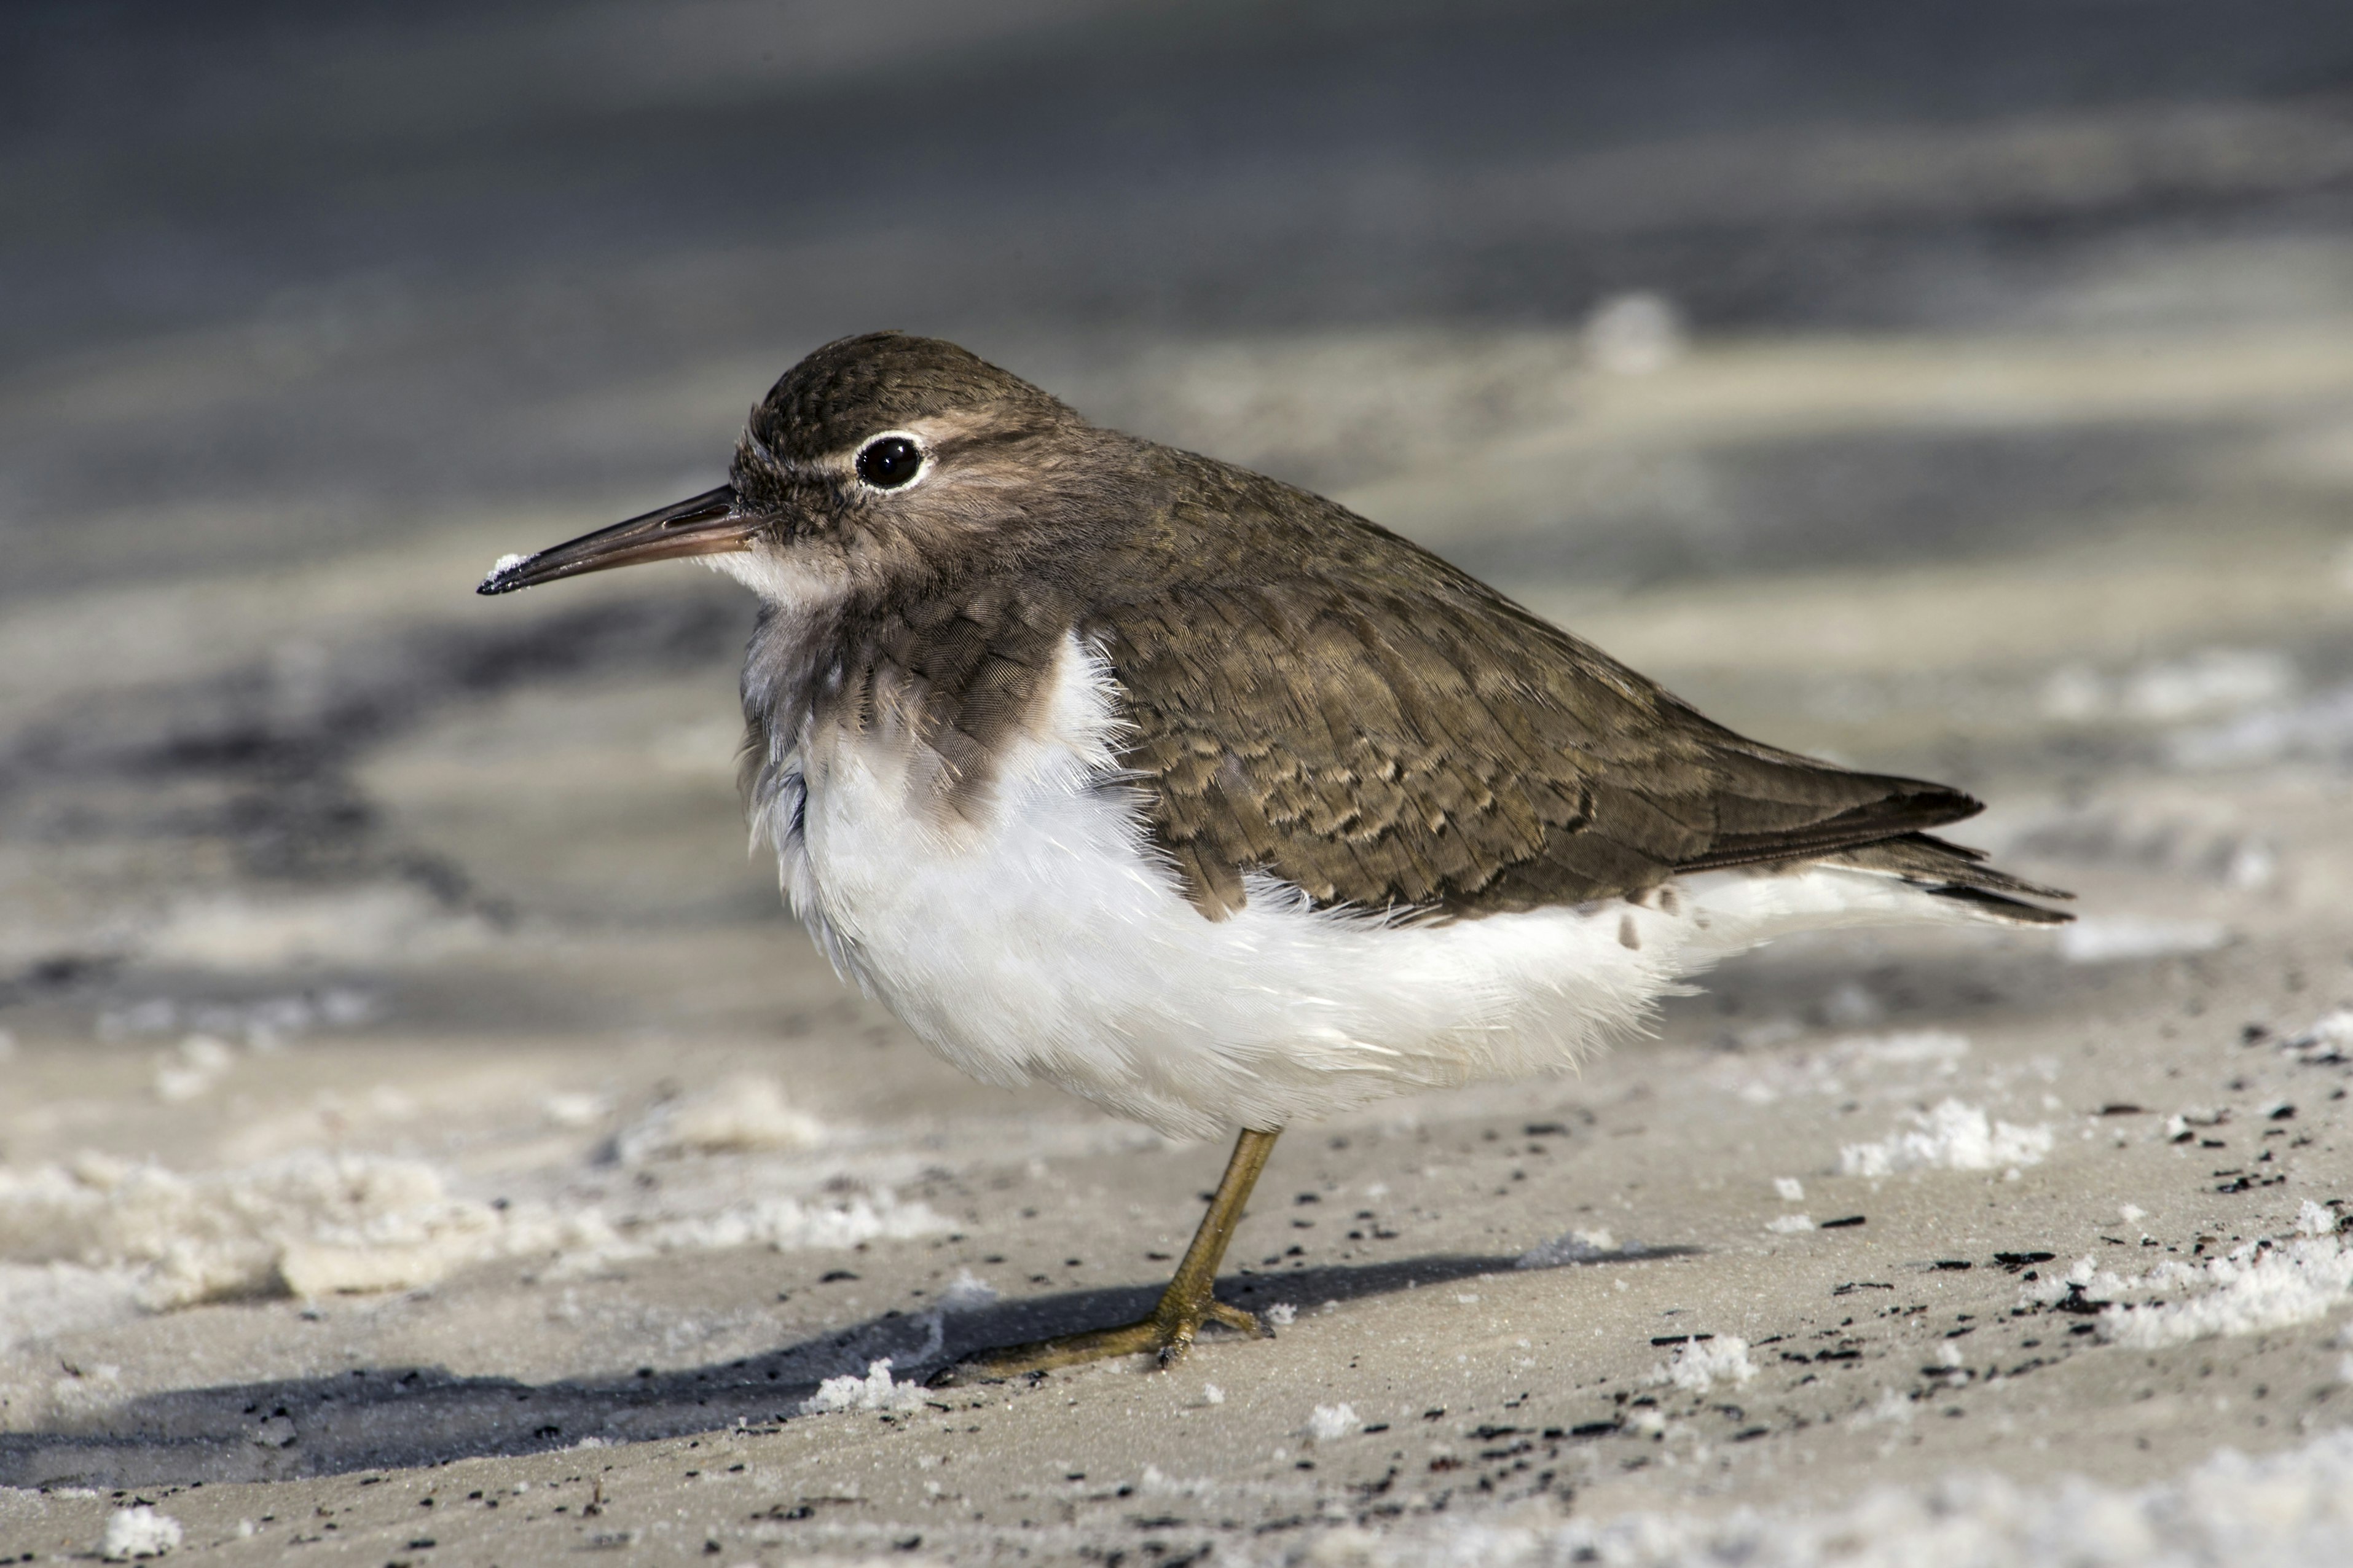 Spotted Sandpiper in winter plumage on the beach at Honeymoon Island State Park, St. Petersburg, Florida